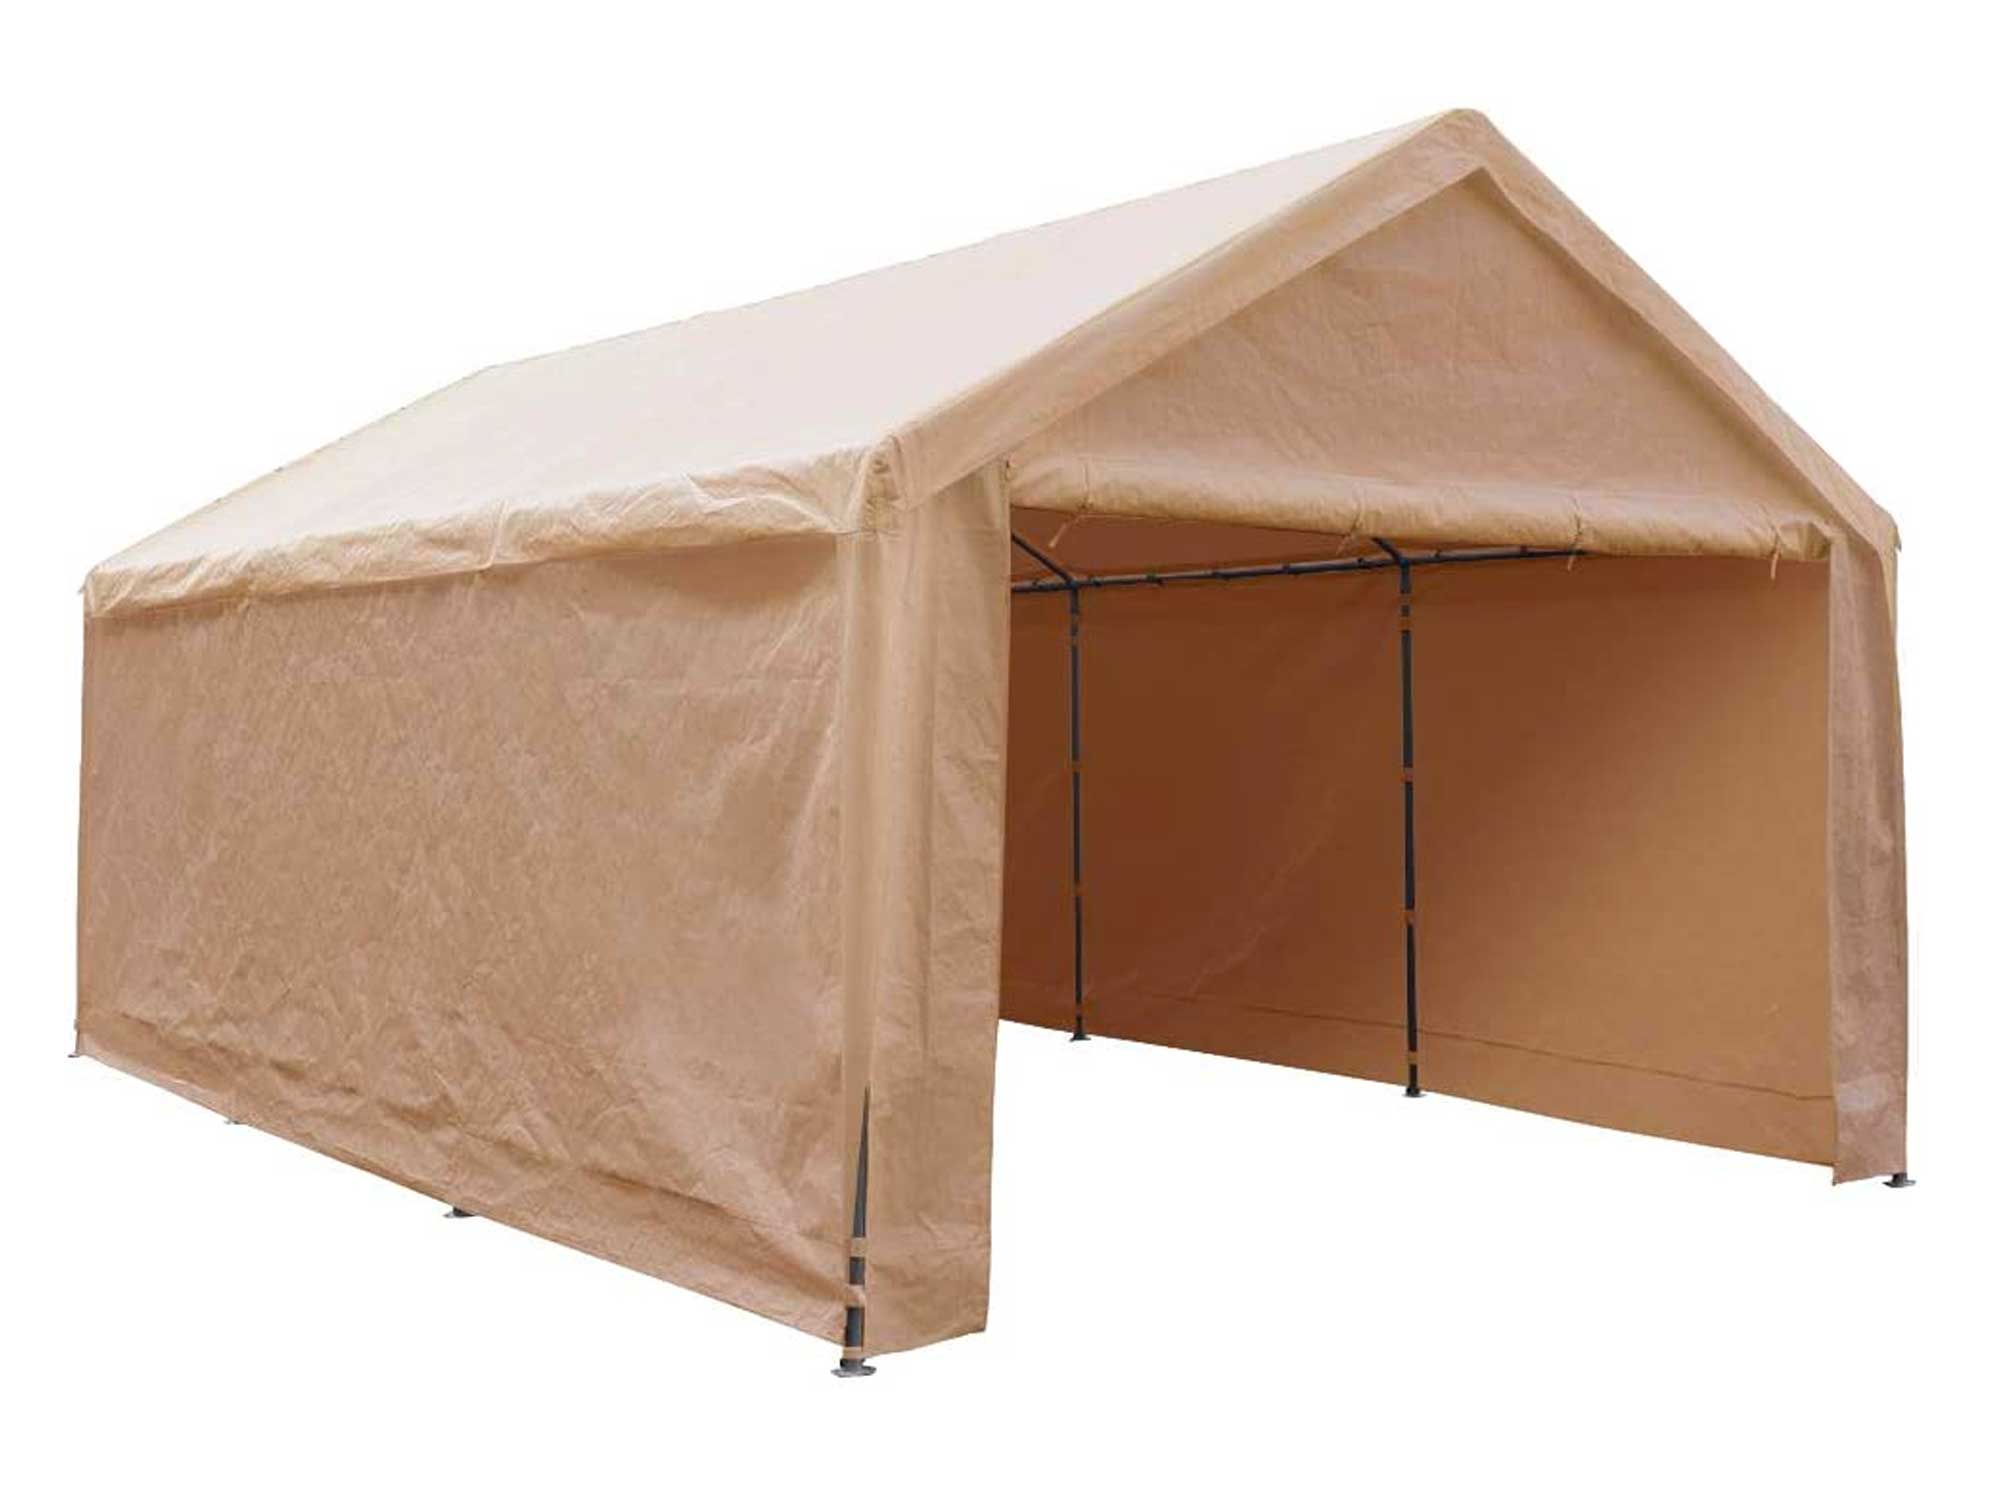 Abba Patio Extra Large Heavy Duty Carport with Removable Sidewalls Portable Garage Car Canopy Boat Shelter Tent for Party, Wedding, Garden Storage Shed 8 Legs, 12 x 20 Feet,Beige